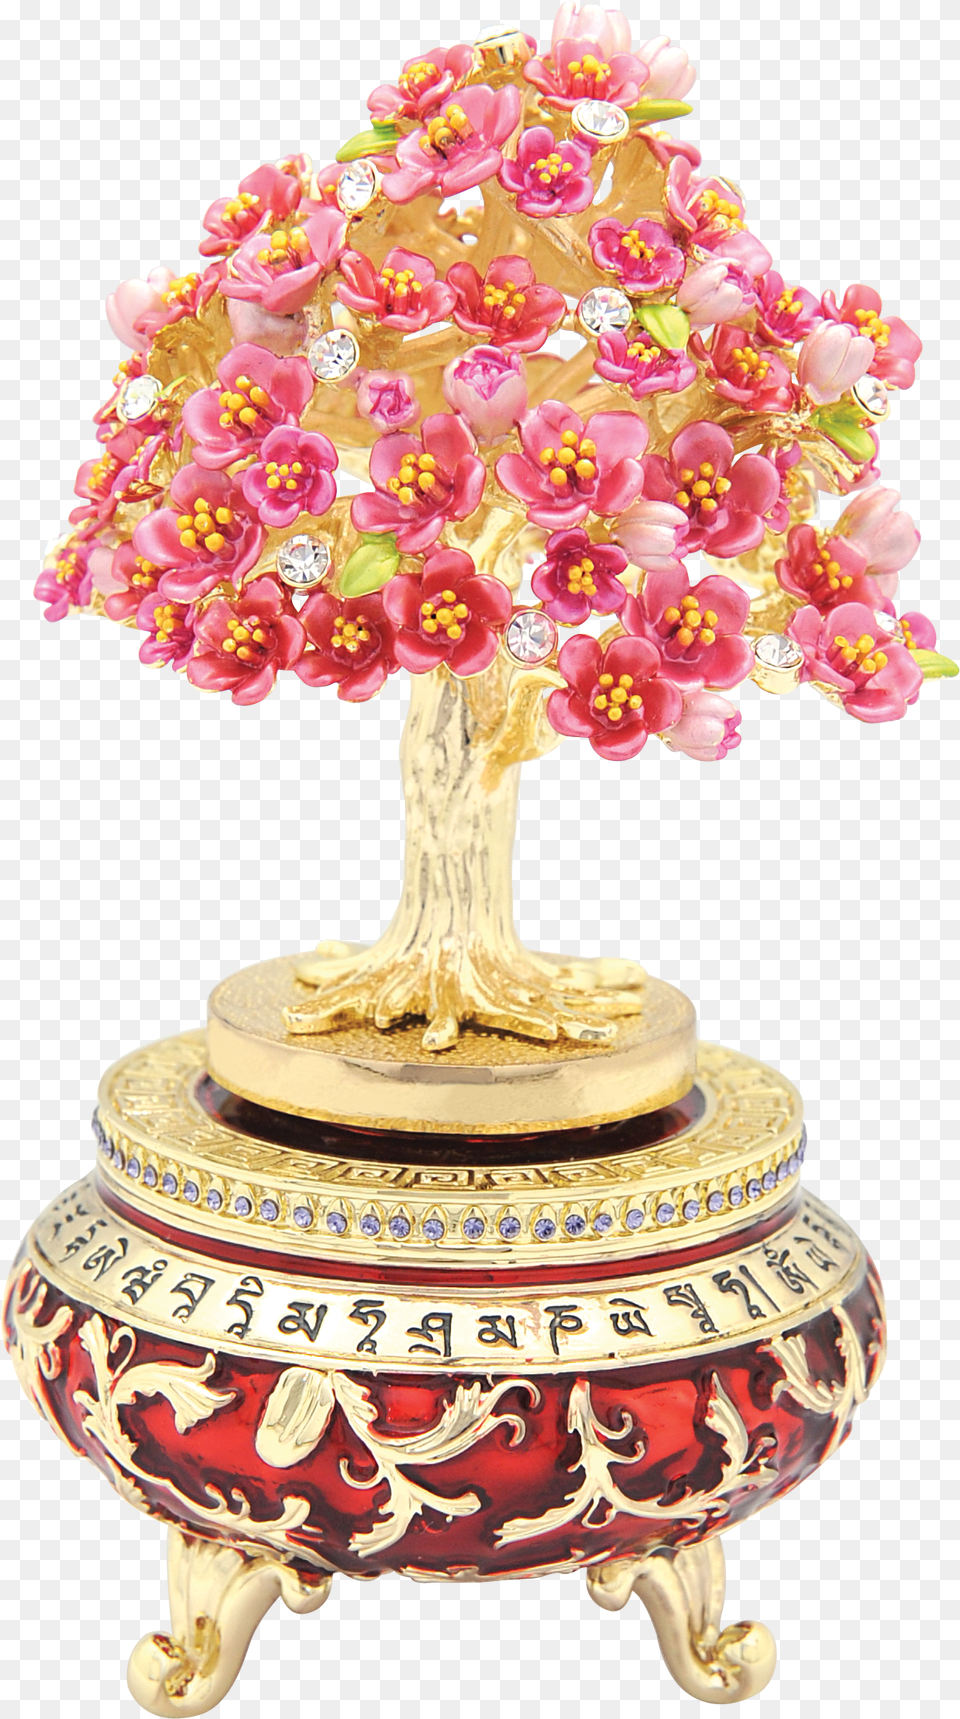 Peach Blossom Music Granting Tree Peach Blossom Music Tree, Flower, Flower Arrangement, Plant, Potted Plant Png Image